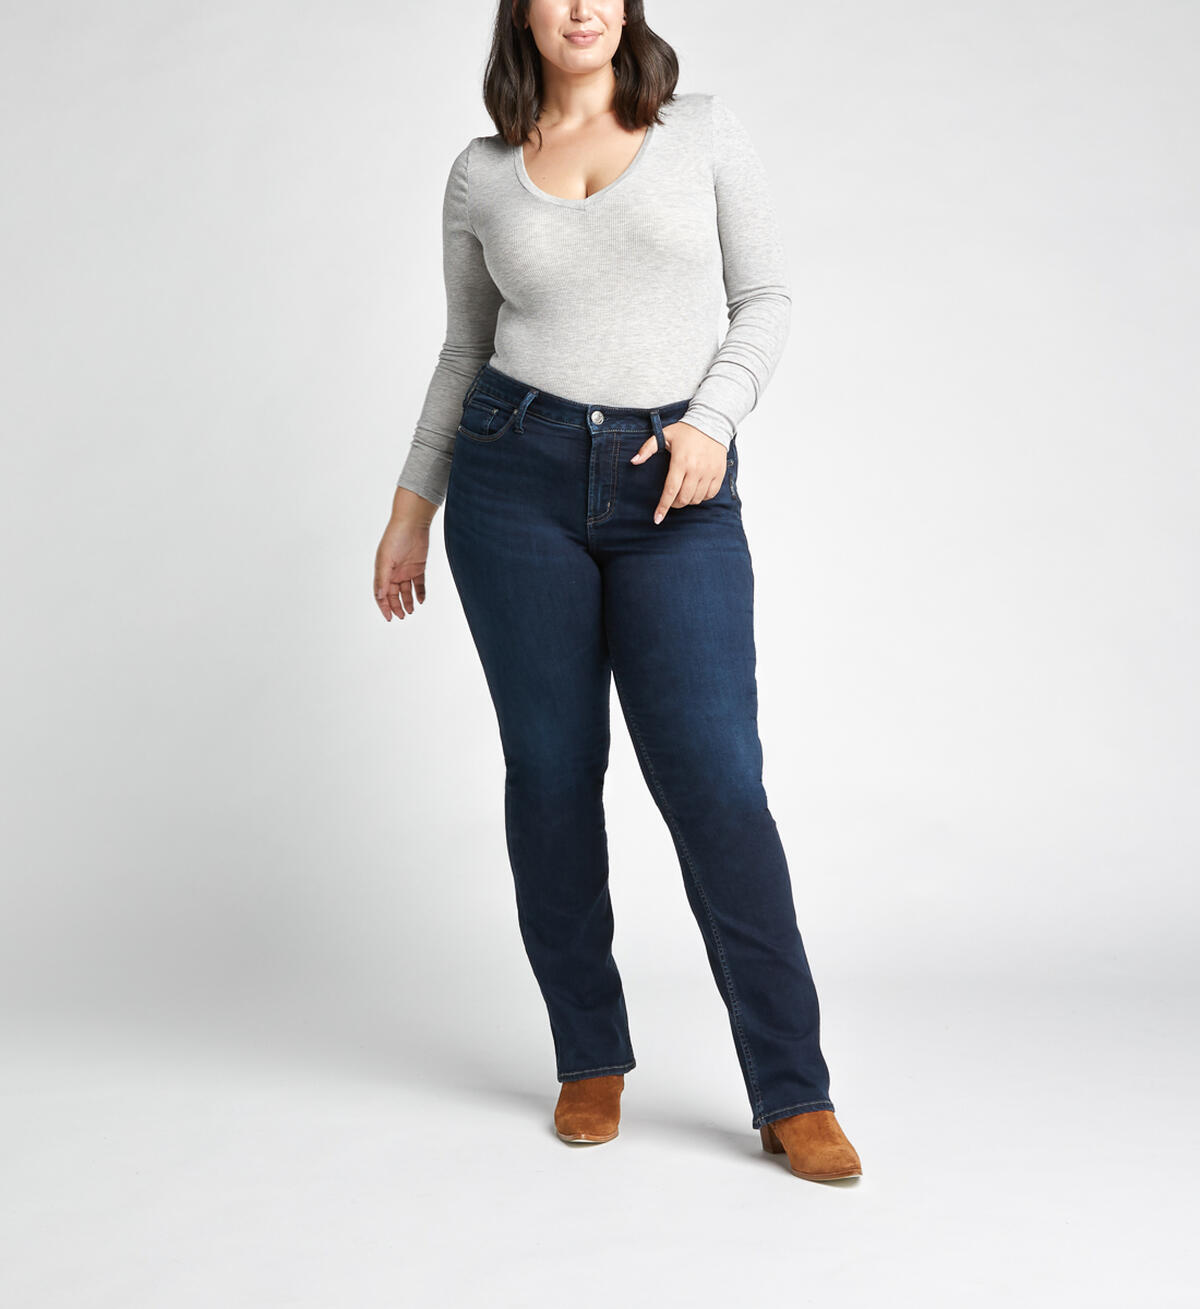 Avery High Rise Slim Bootcut Jeans Plus Size, Indigo, hi-res image number 0